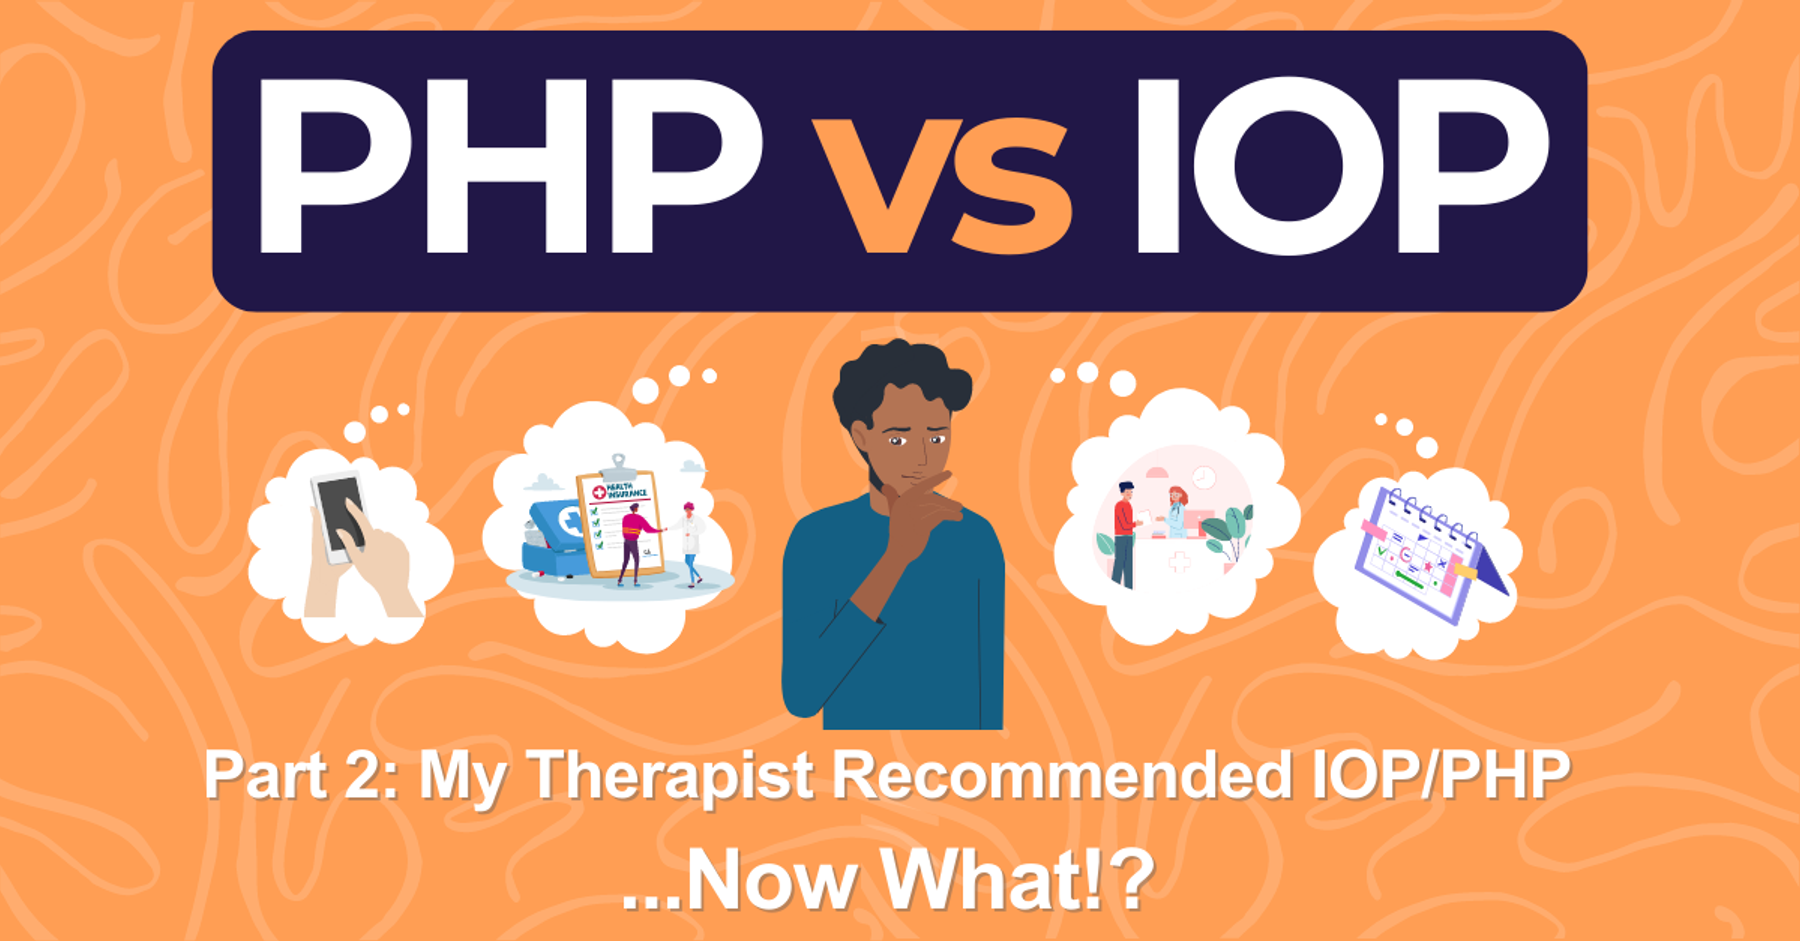 PHP vs IOP Part 2: My Therapist Recommended IOP/PHPNow What!?